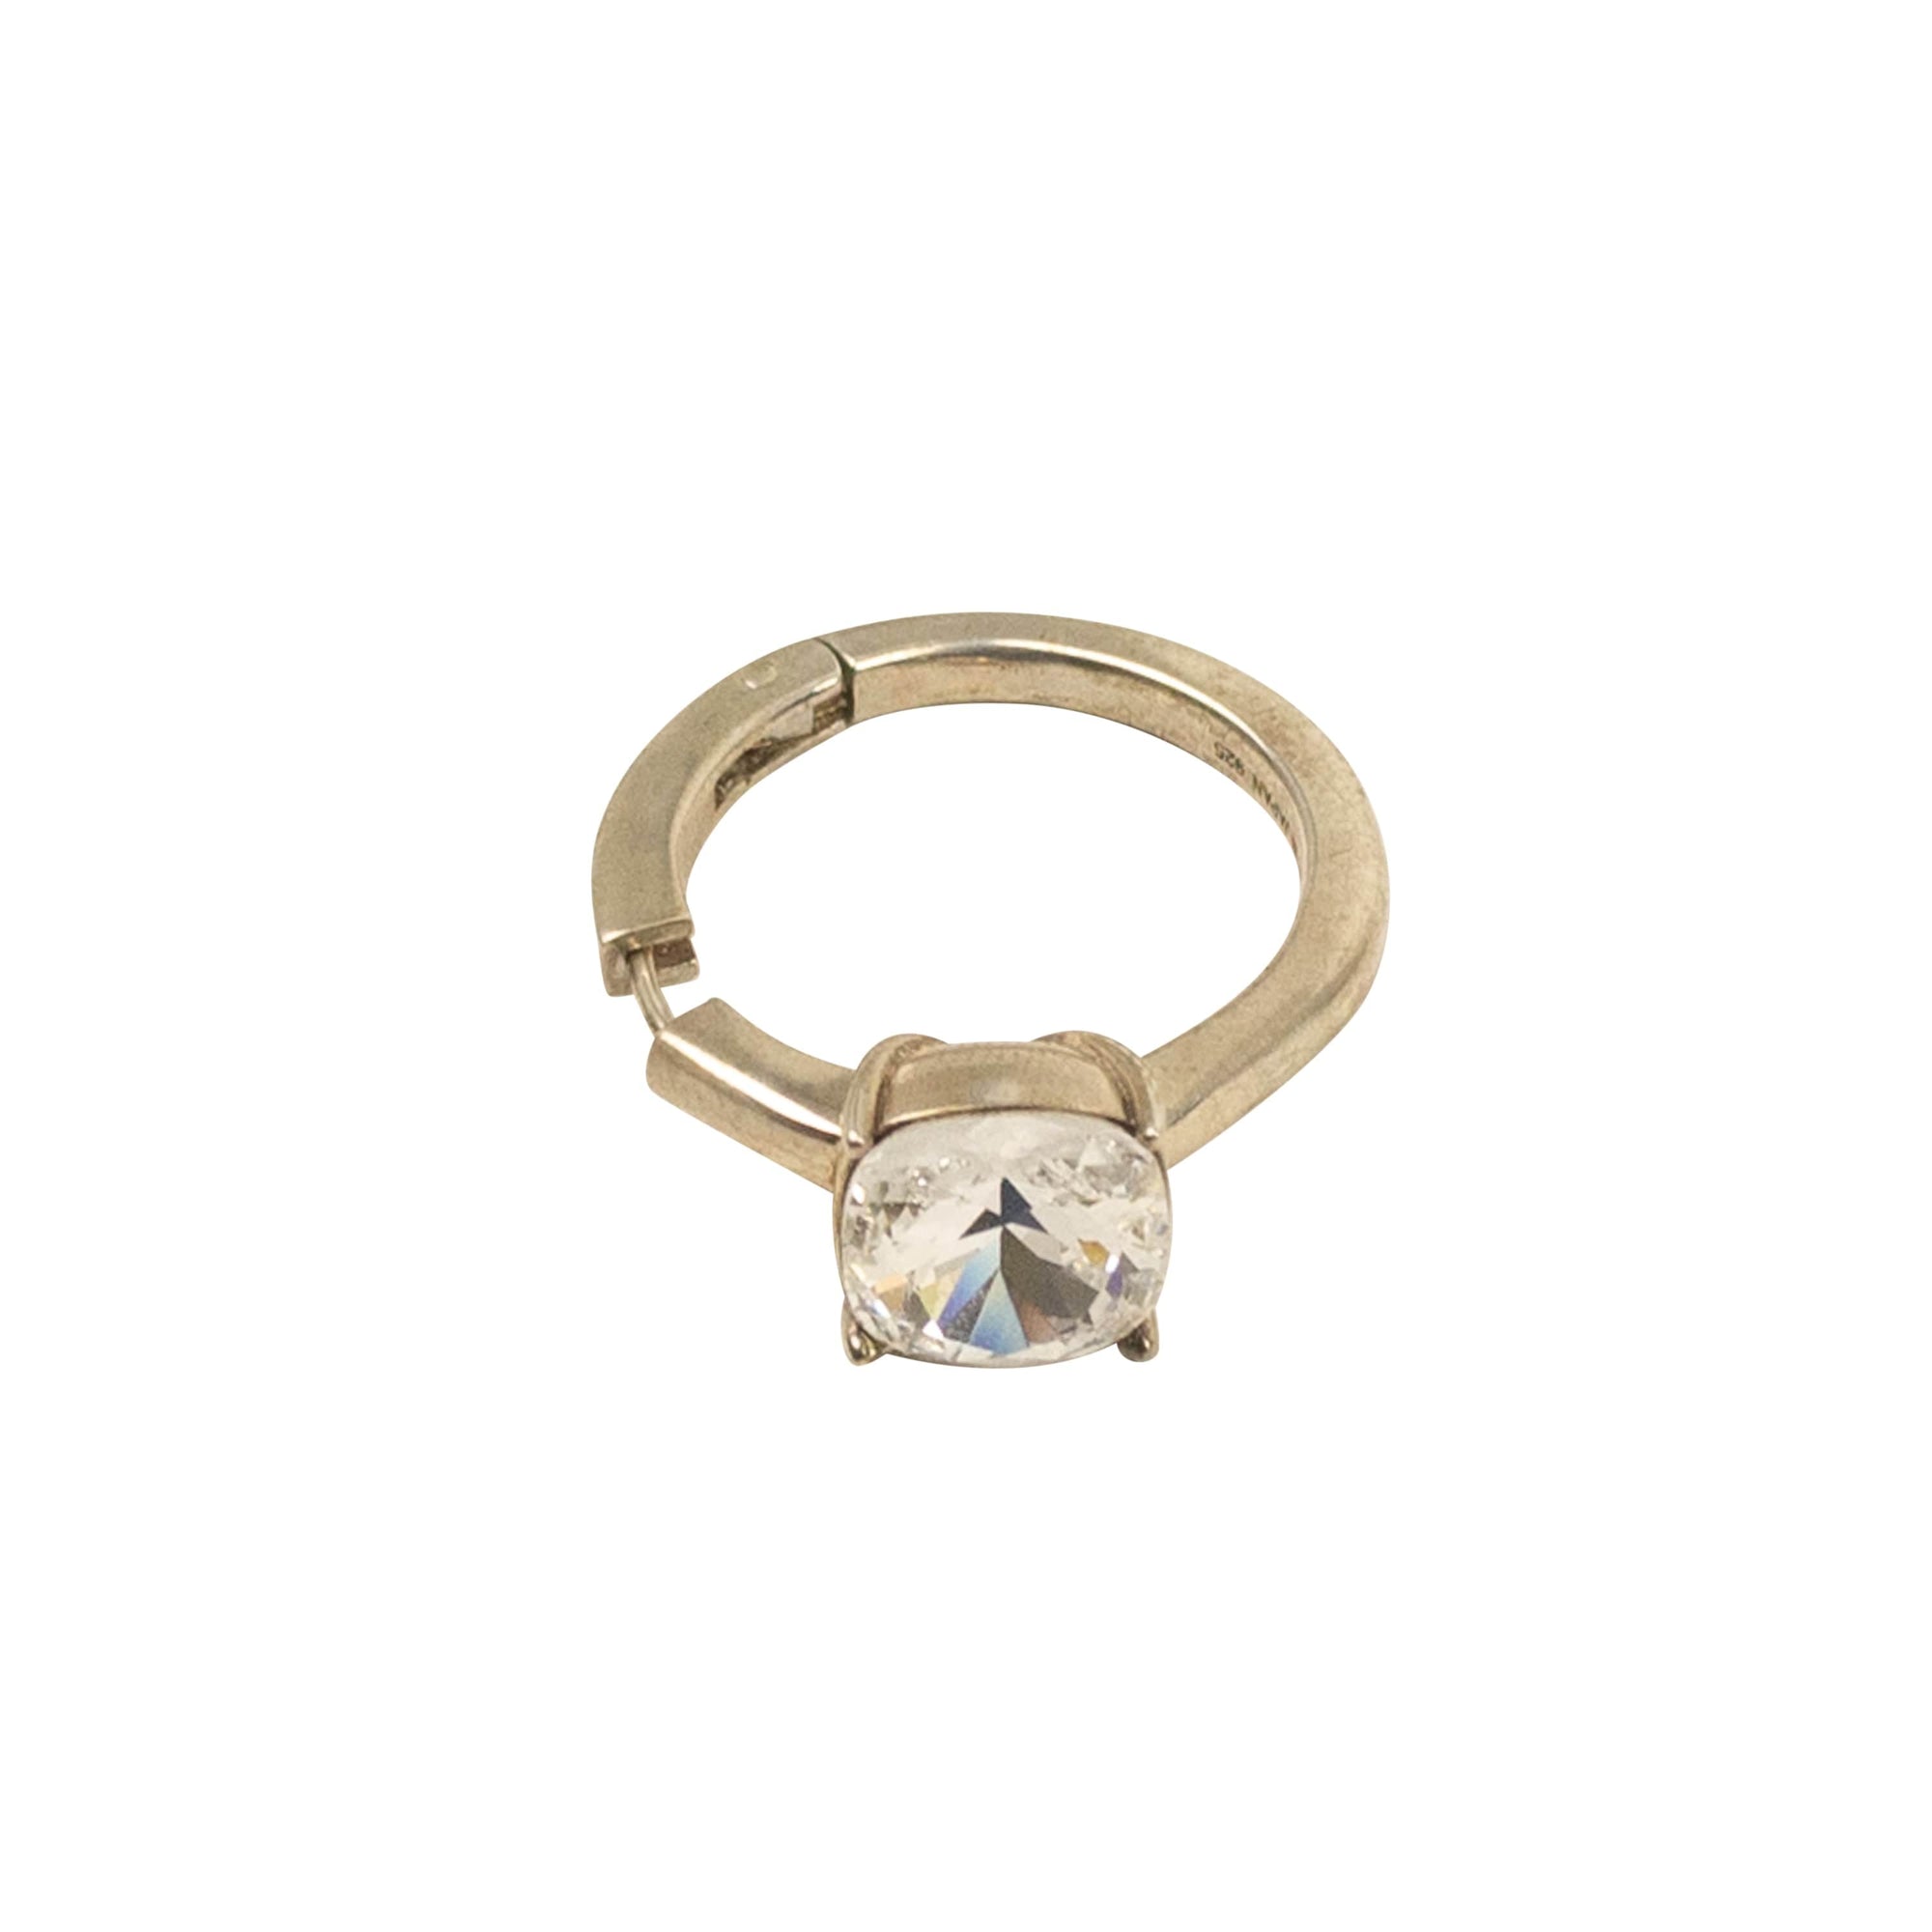 Ambush ambush, channelenable-all, chicmi, couponcollection, gender-mens, gender-womens, main-accessories, mens-shoes, shop375, size-os, under-250, unisex-jewelry OS Silver Solitaire Hoop Earring 95-AMB-3052/OS 95-AMB-3052/OS